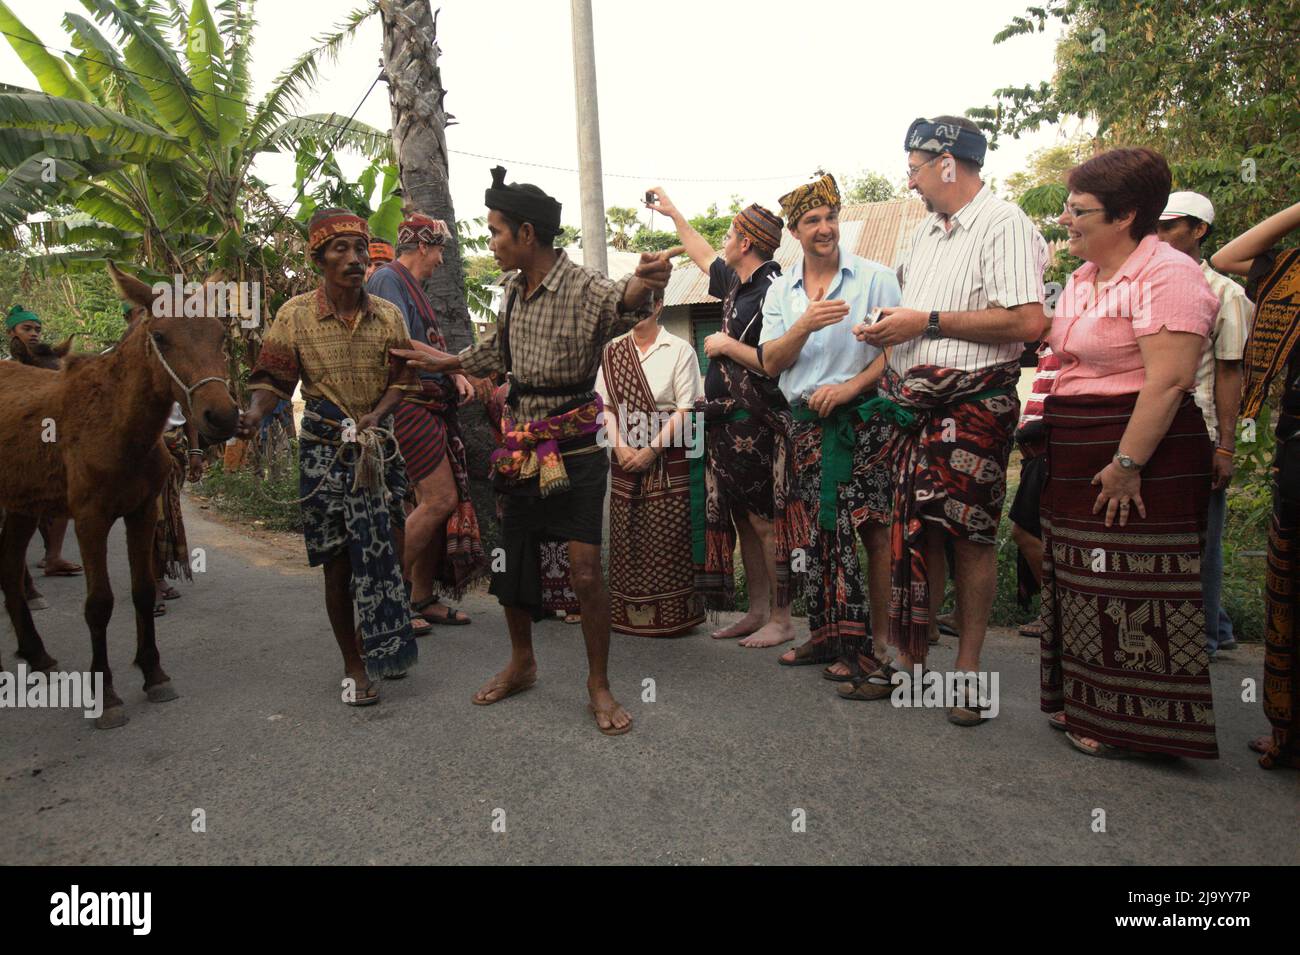 Umbu Ndjurumanna's relatives bringing ponies to Sarah Hobgen's local house as a "belis" (traditional term for marriage proposal gift) before the procession of Sumbanese traditional marriage proposal. Archival photo. Reportage (2011). Stock Photo